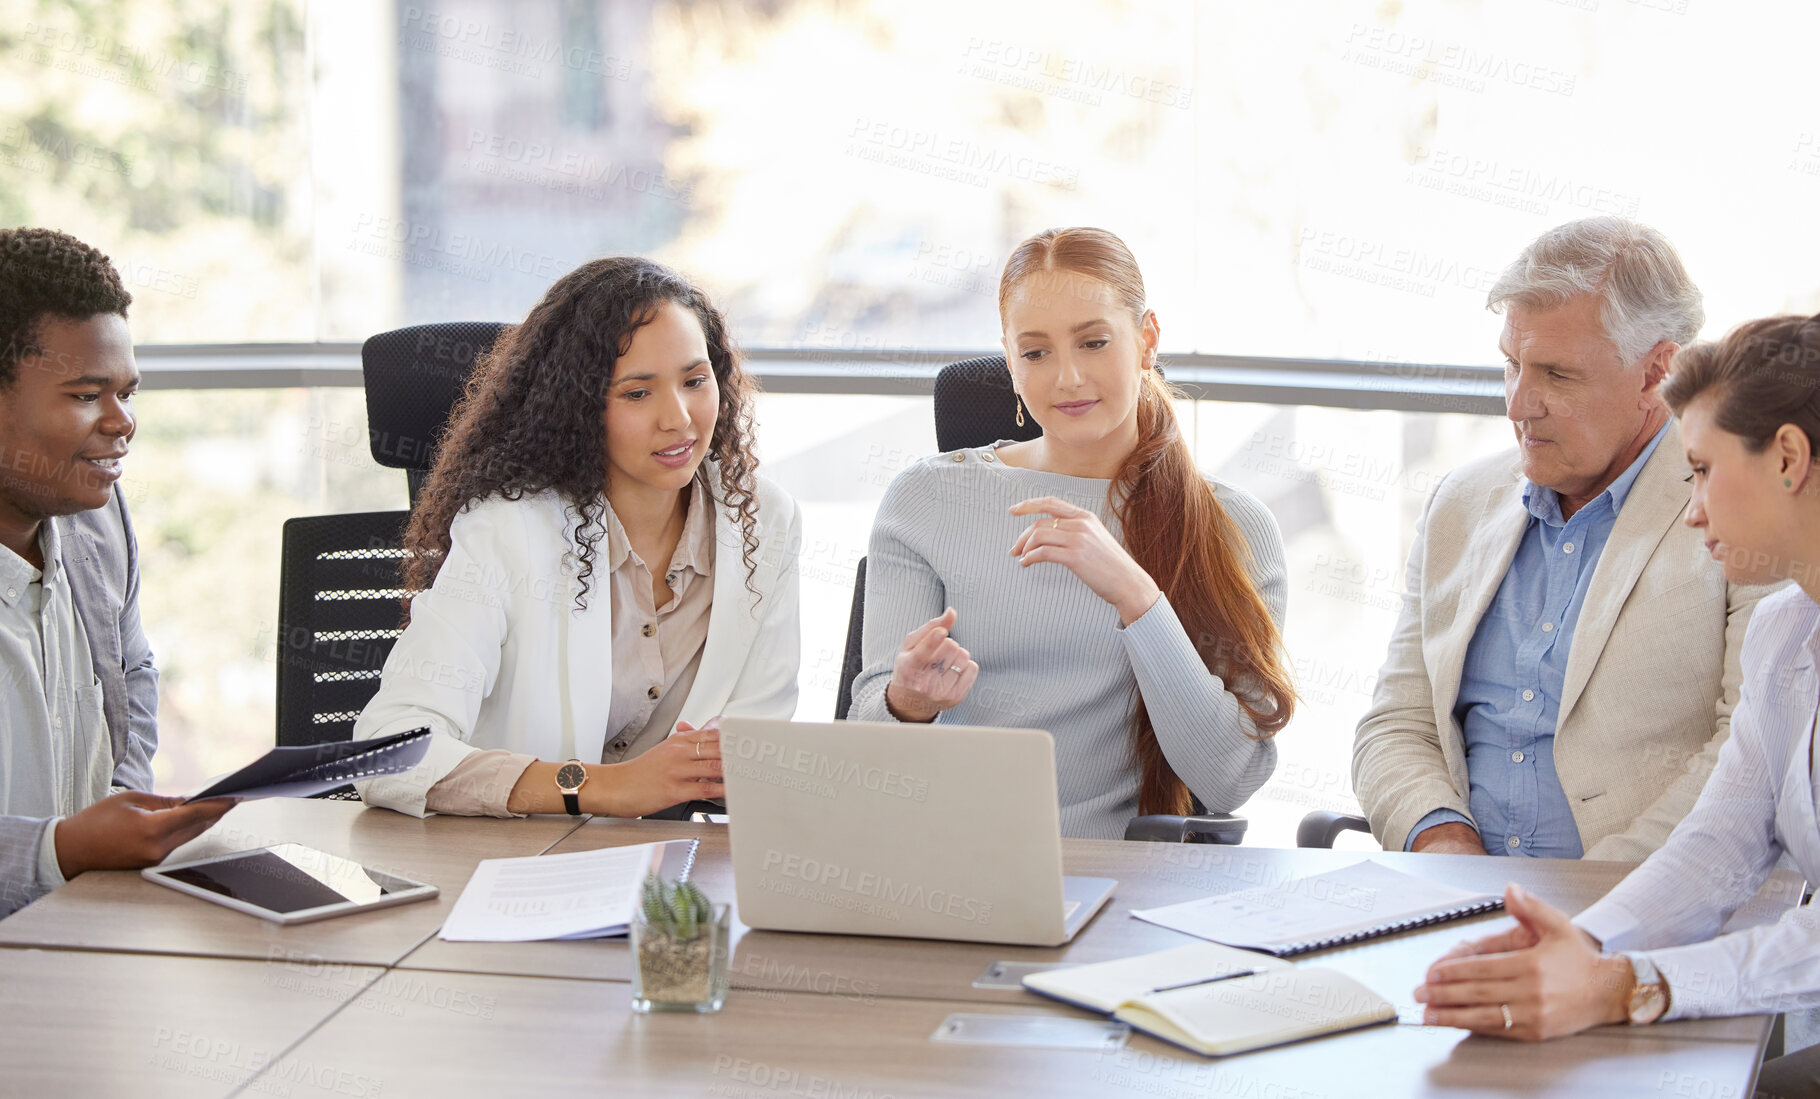 Buy stock photo Shot of a diverse group of businesspeople sitting in the office together and using a laptop during a meeting